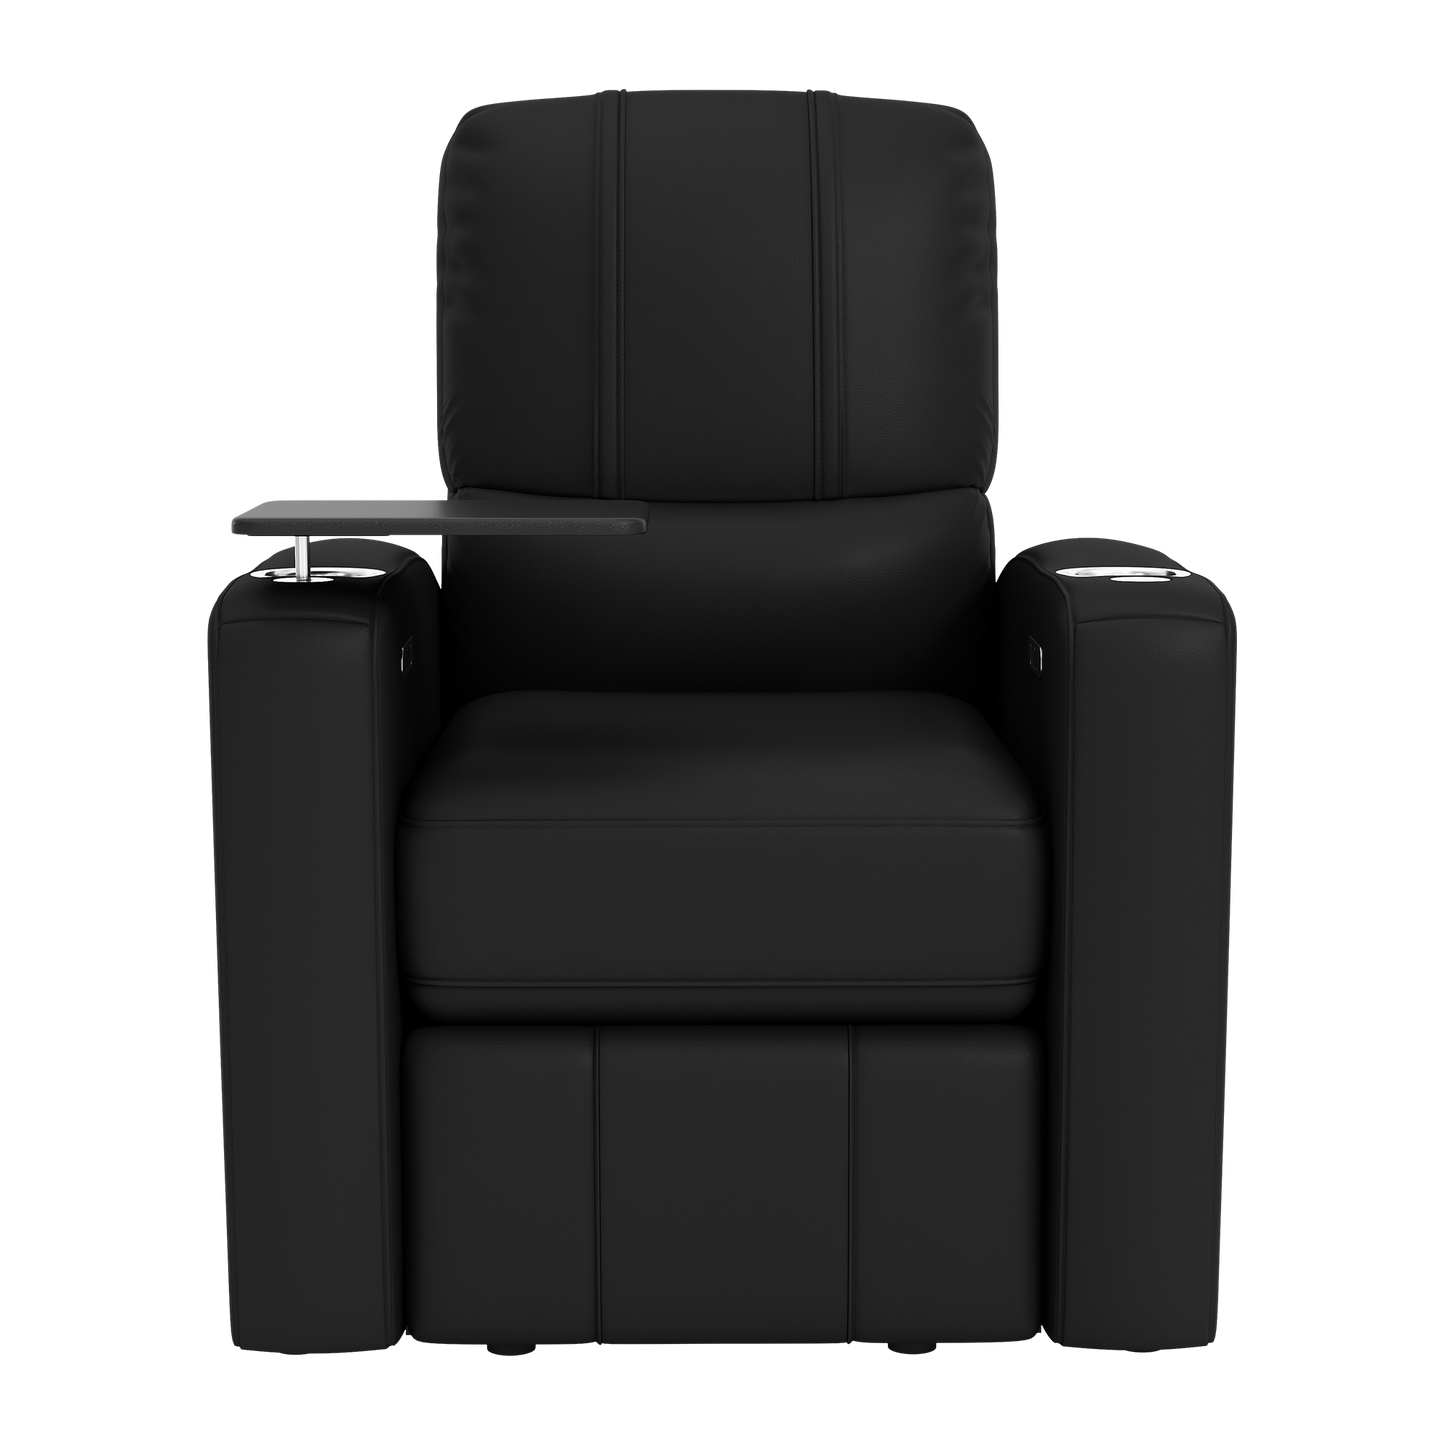 Stealth Power Plus Recliner with Bemidji State University Primary Logo